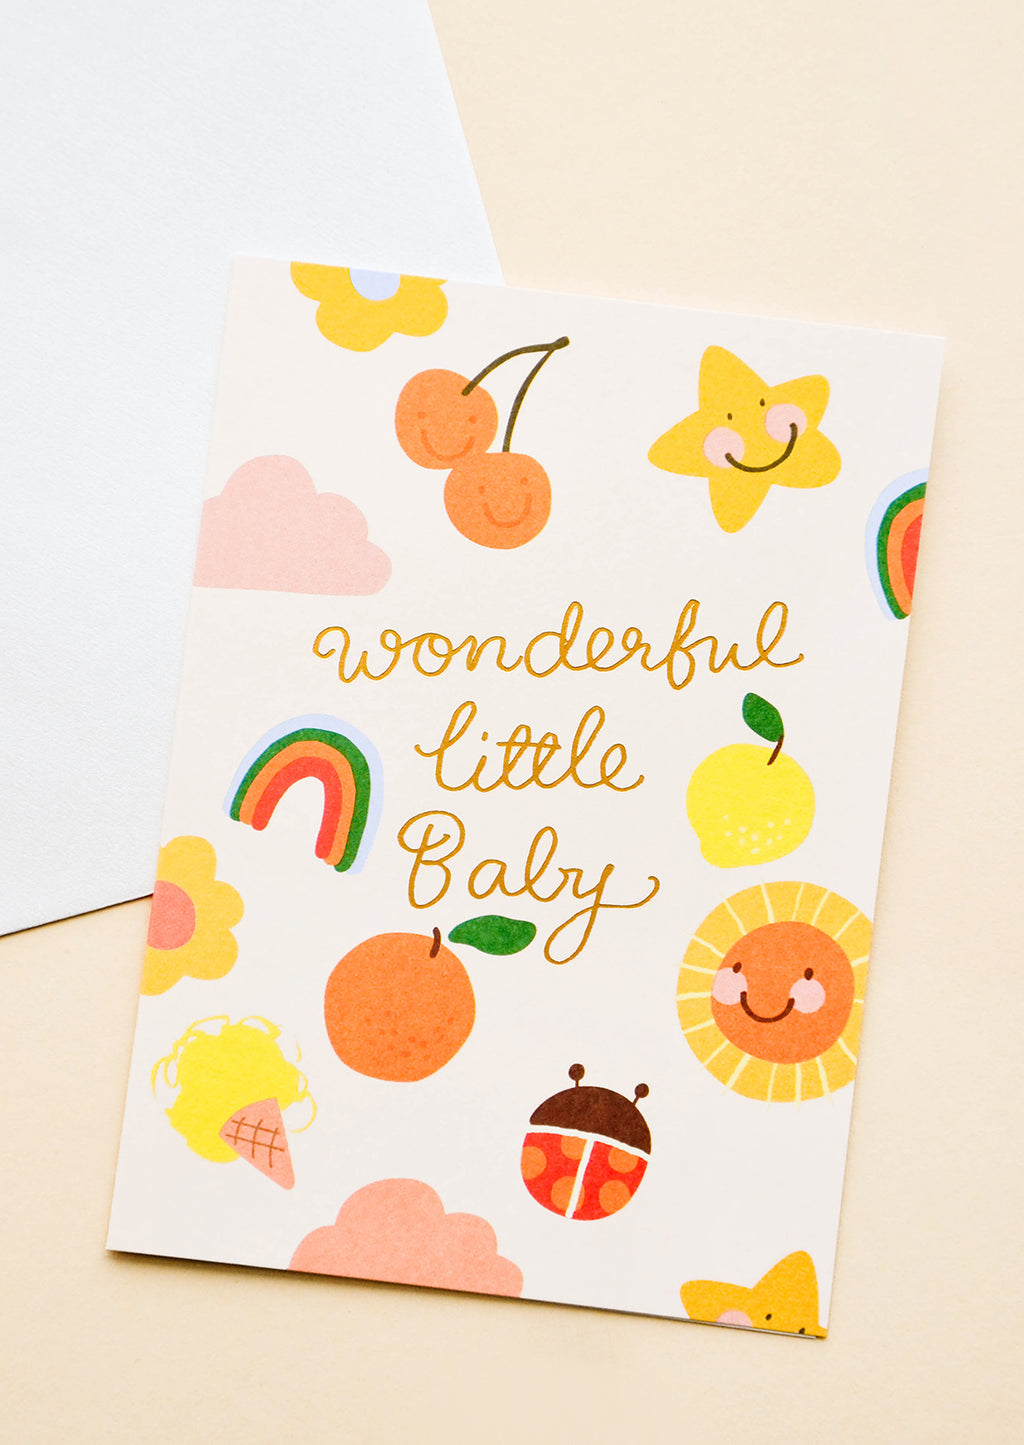 1: Greeting card with illustrated shapes and "wonderful little baby" written in gold foil.